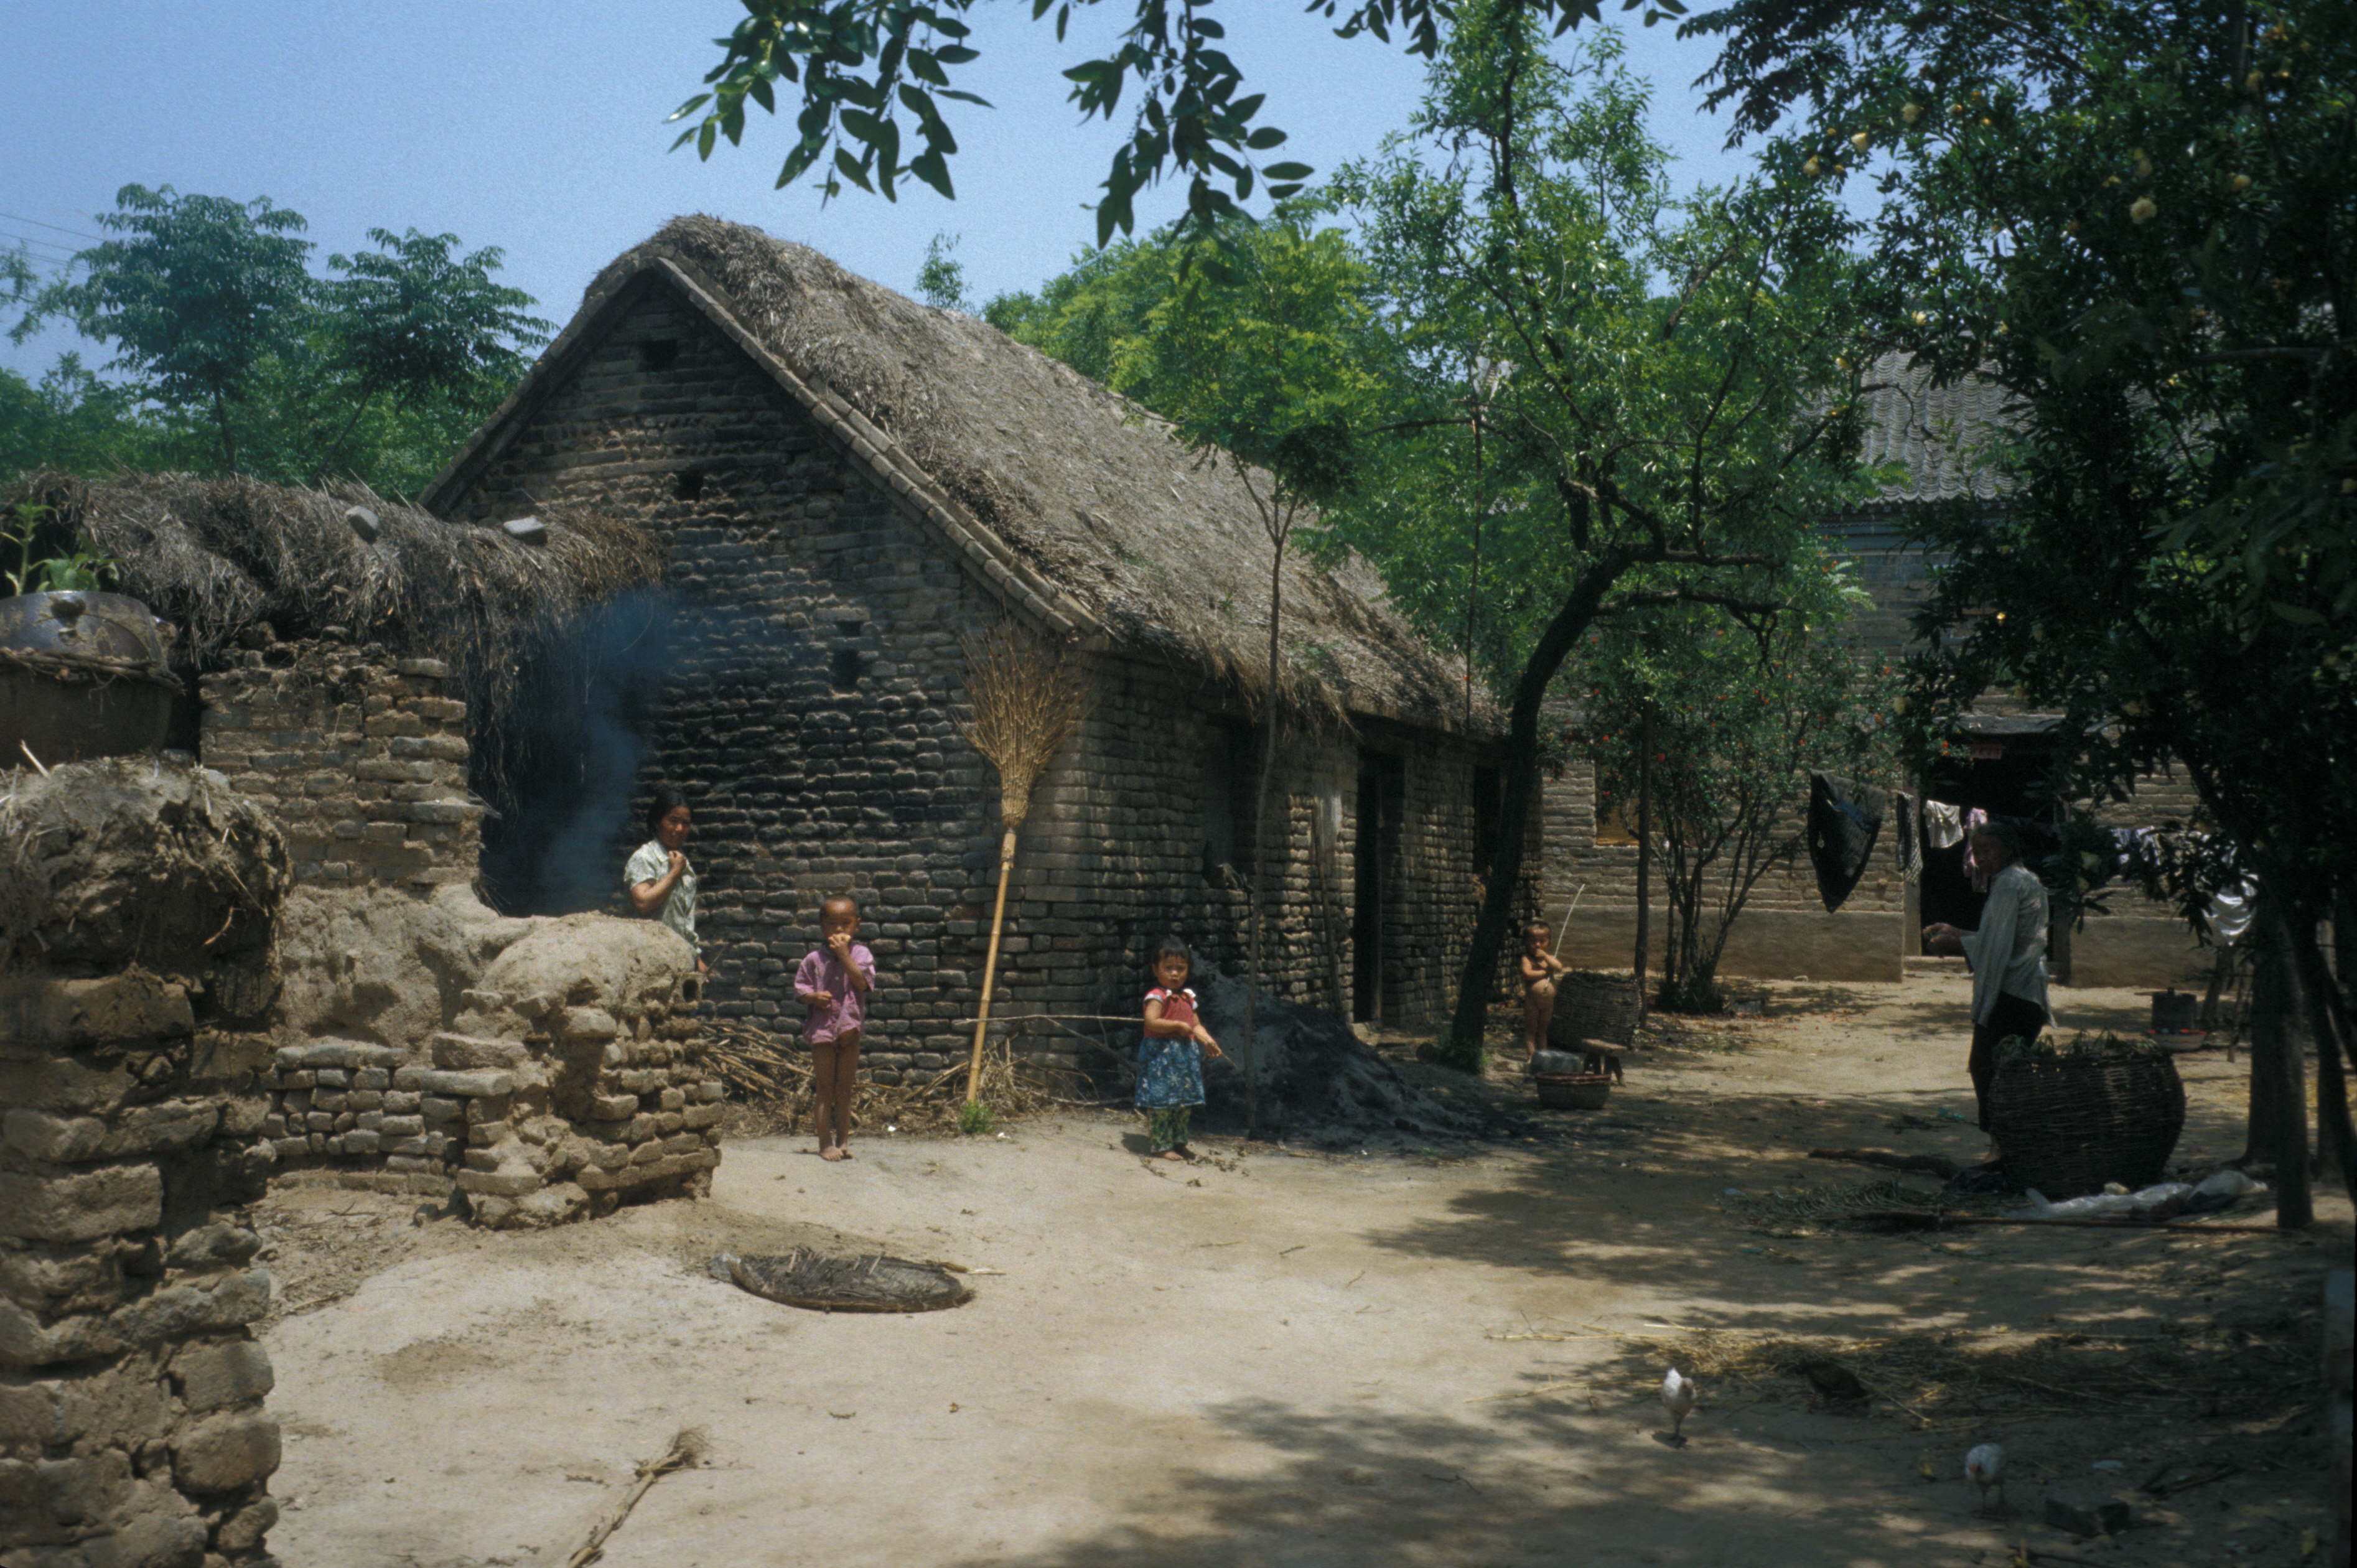 Children and adults stand outside a house in a village in China’s Henan province circa 1984. Photo: Roger Viollet via Getty Images